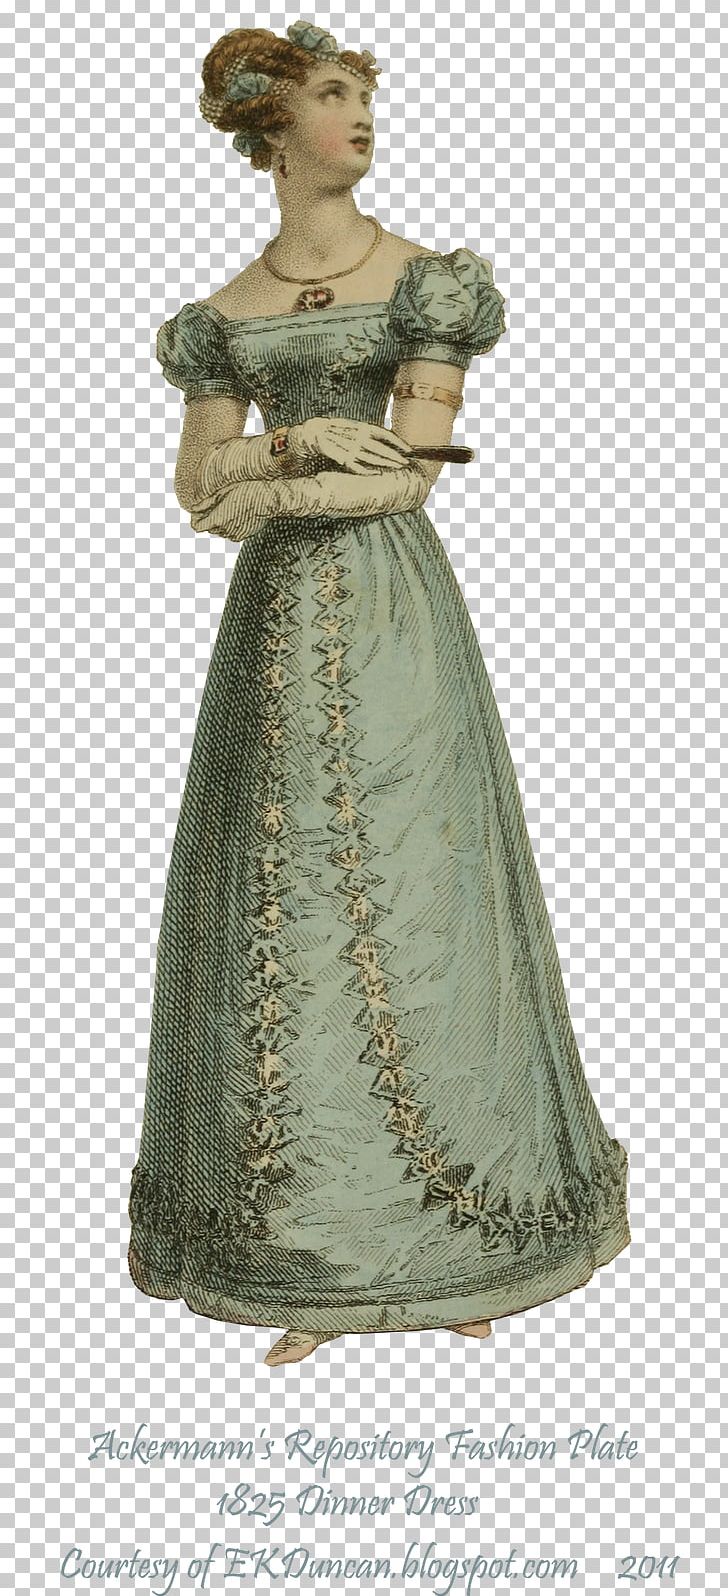 19th Century 1820s Fashion Dress Costume PNG, Clipart, 19th Century, 1820s, Clothing, Costume, Costume Design Free PNG Download